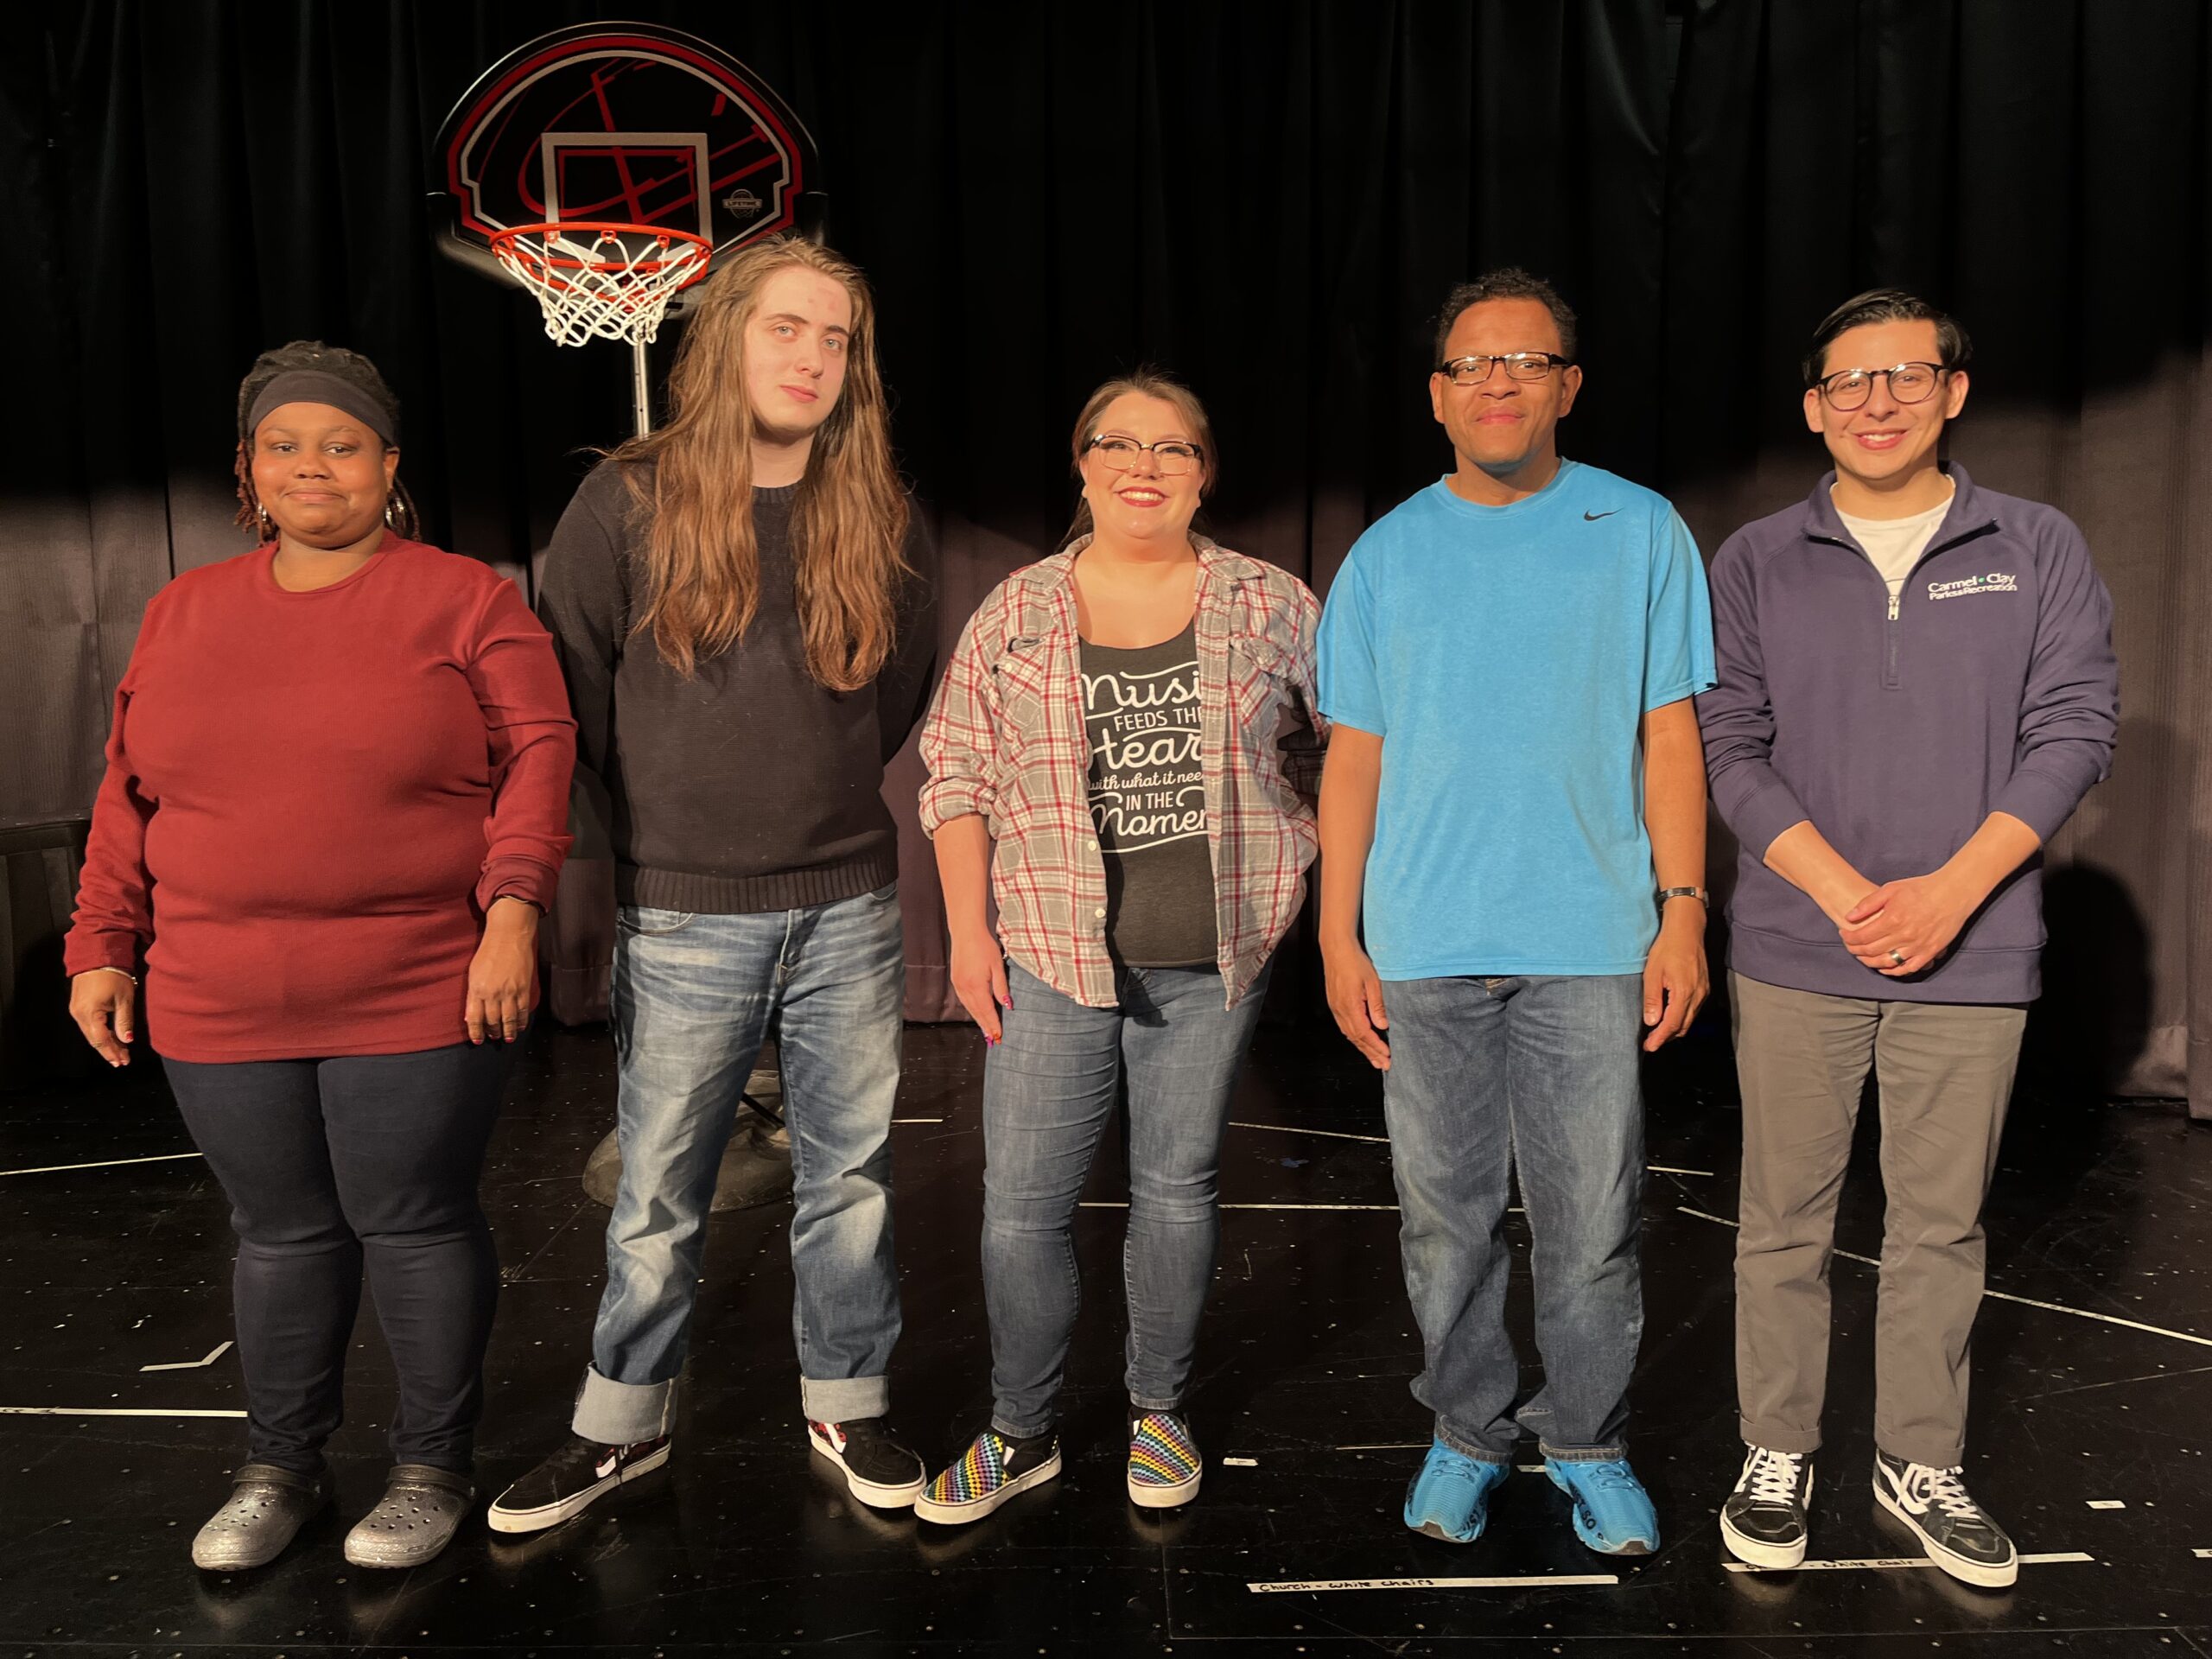 2023 Barrier-Free Theatre Crew. From left to right, Amber Sykes, Quin Strzynski, Jade Alia, Bryan Pame, Kelvin Solares